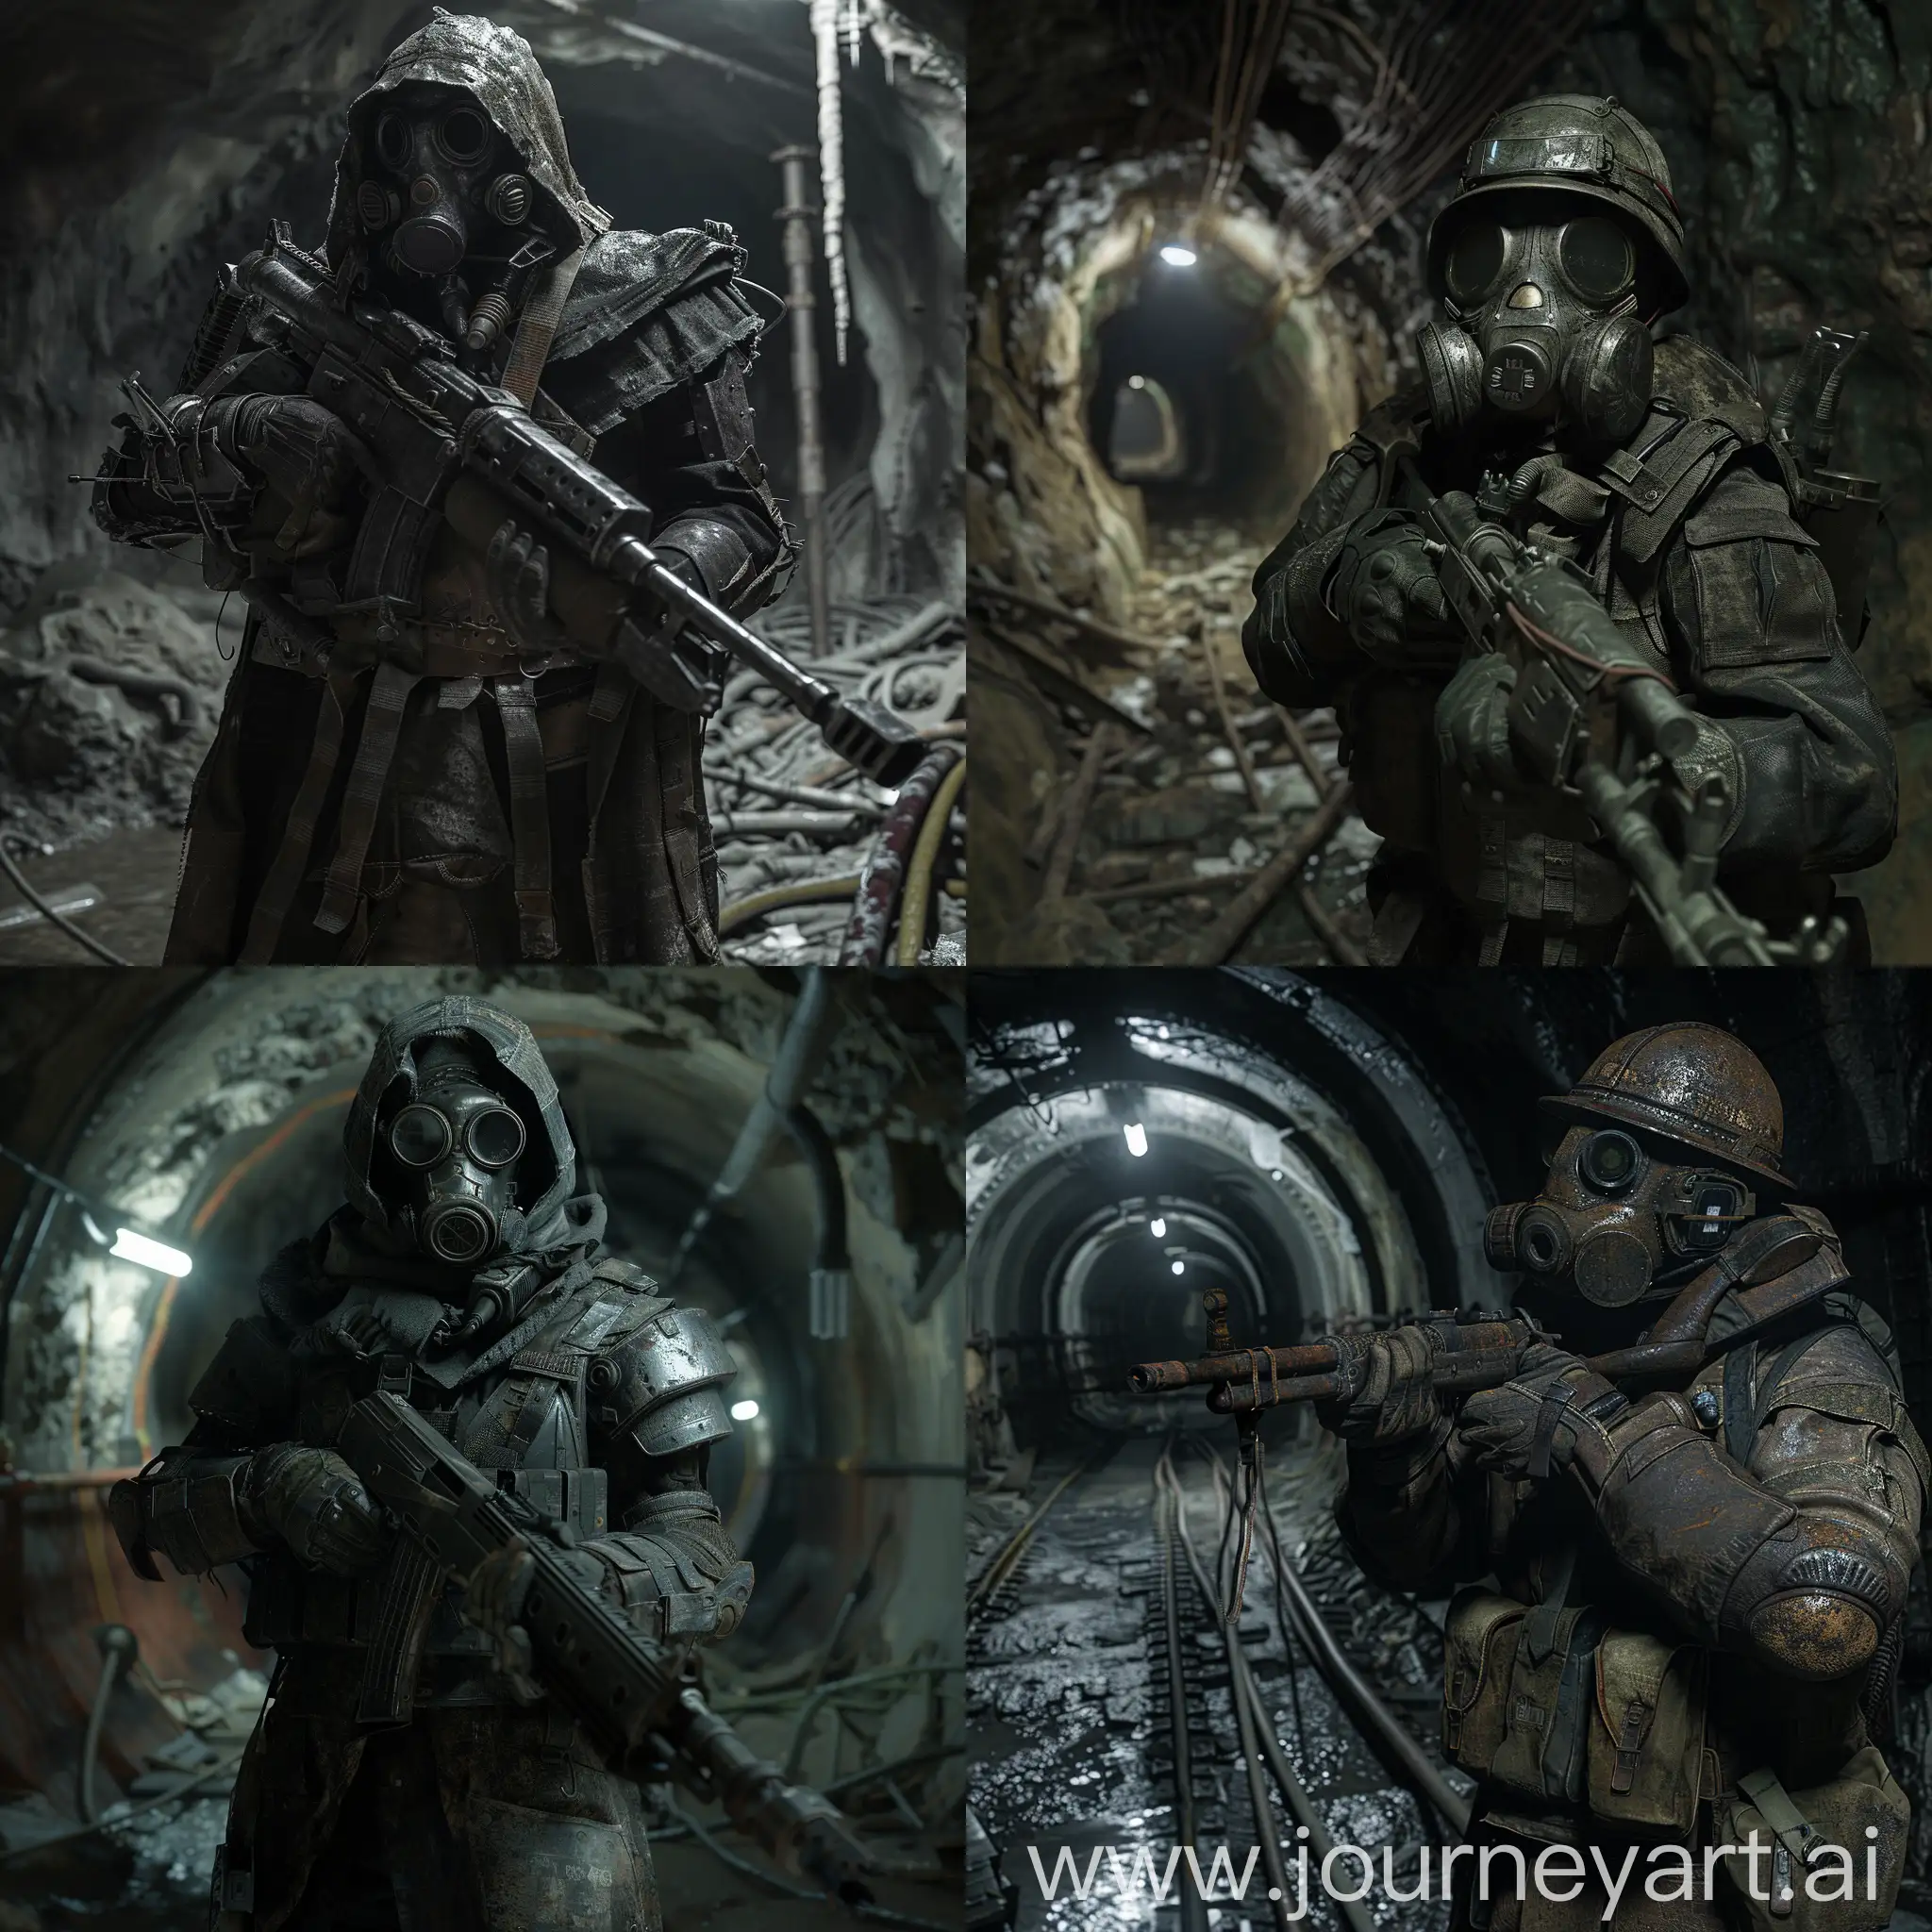 Metro 2033, survivor stand in post-apocalyptic  metal armor suit and gasmask in a dirty and abandoned catacombs, he hold an old Soviet sniper rifle with both hands, lack of light sources, darkness, despondency, tension.